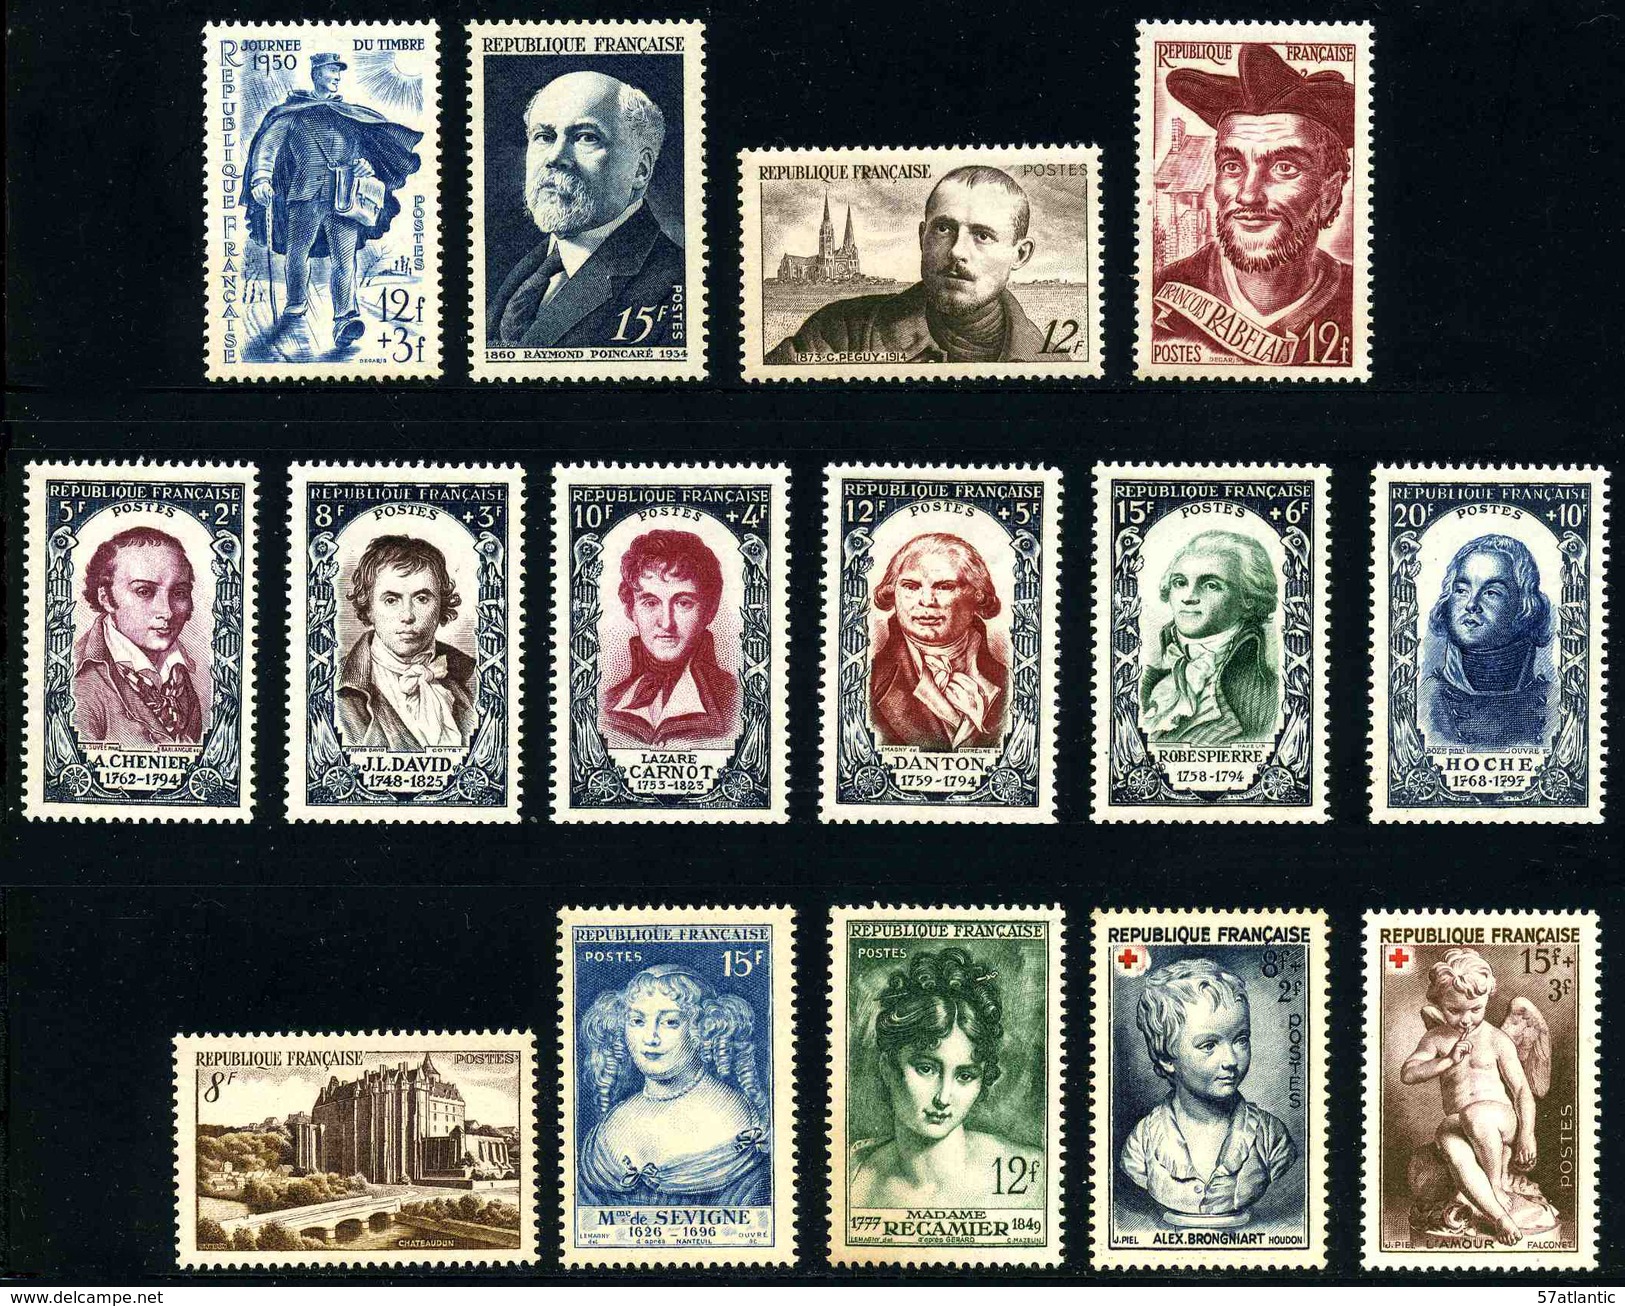 FRANCE - ANNEE COMPLETE 1950 - YT 853 à 877 ** - 15 TIMBRES NEUFS ** - 1950-1959